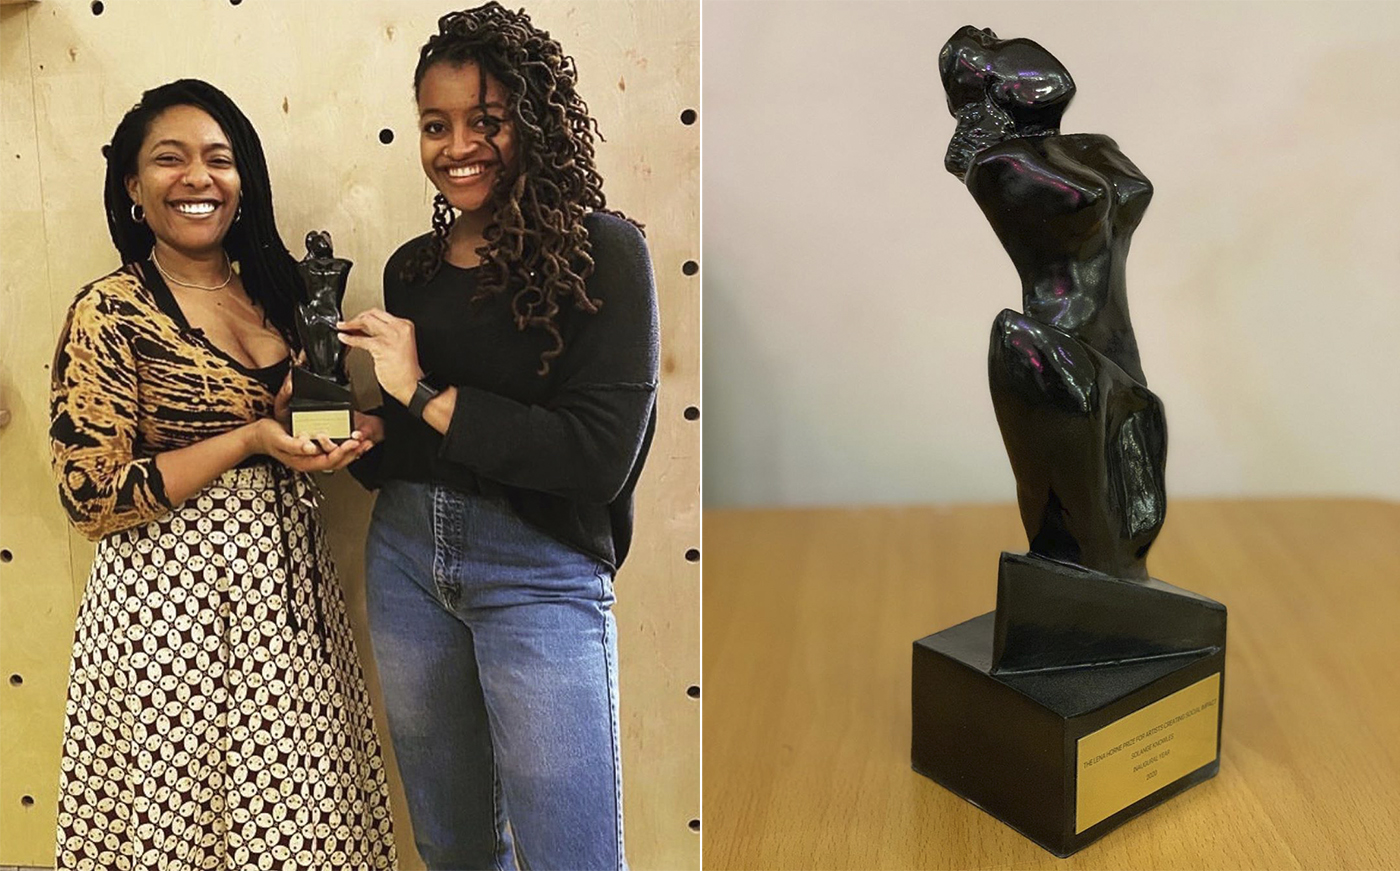 Imani Shanklin Roberts and Nala Turner with the completed Lena Horne Prize for Artists Creating Social Impact (courtesy the artists)